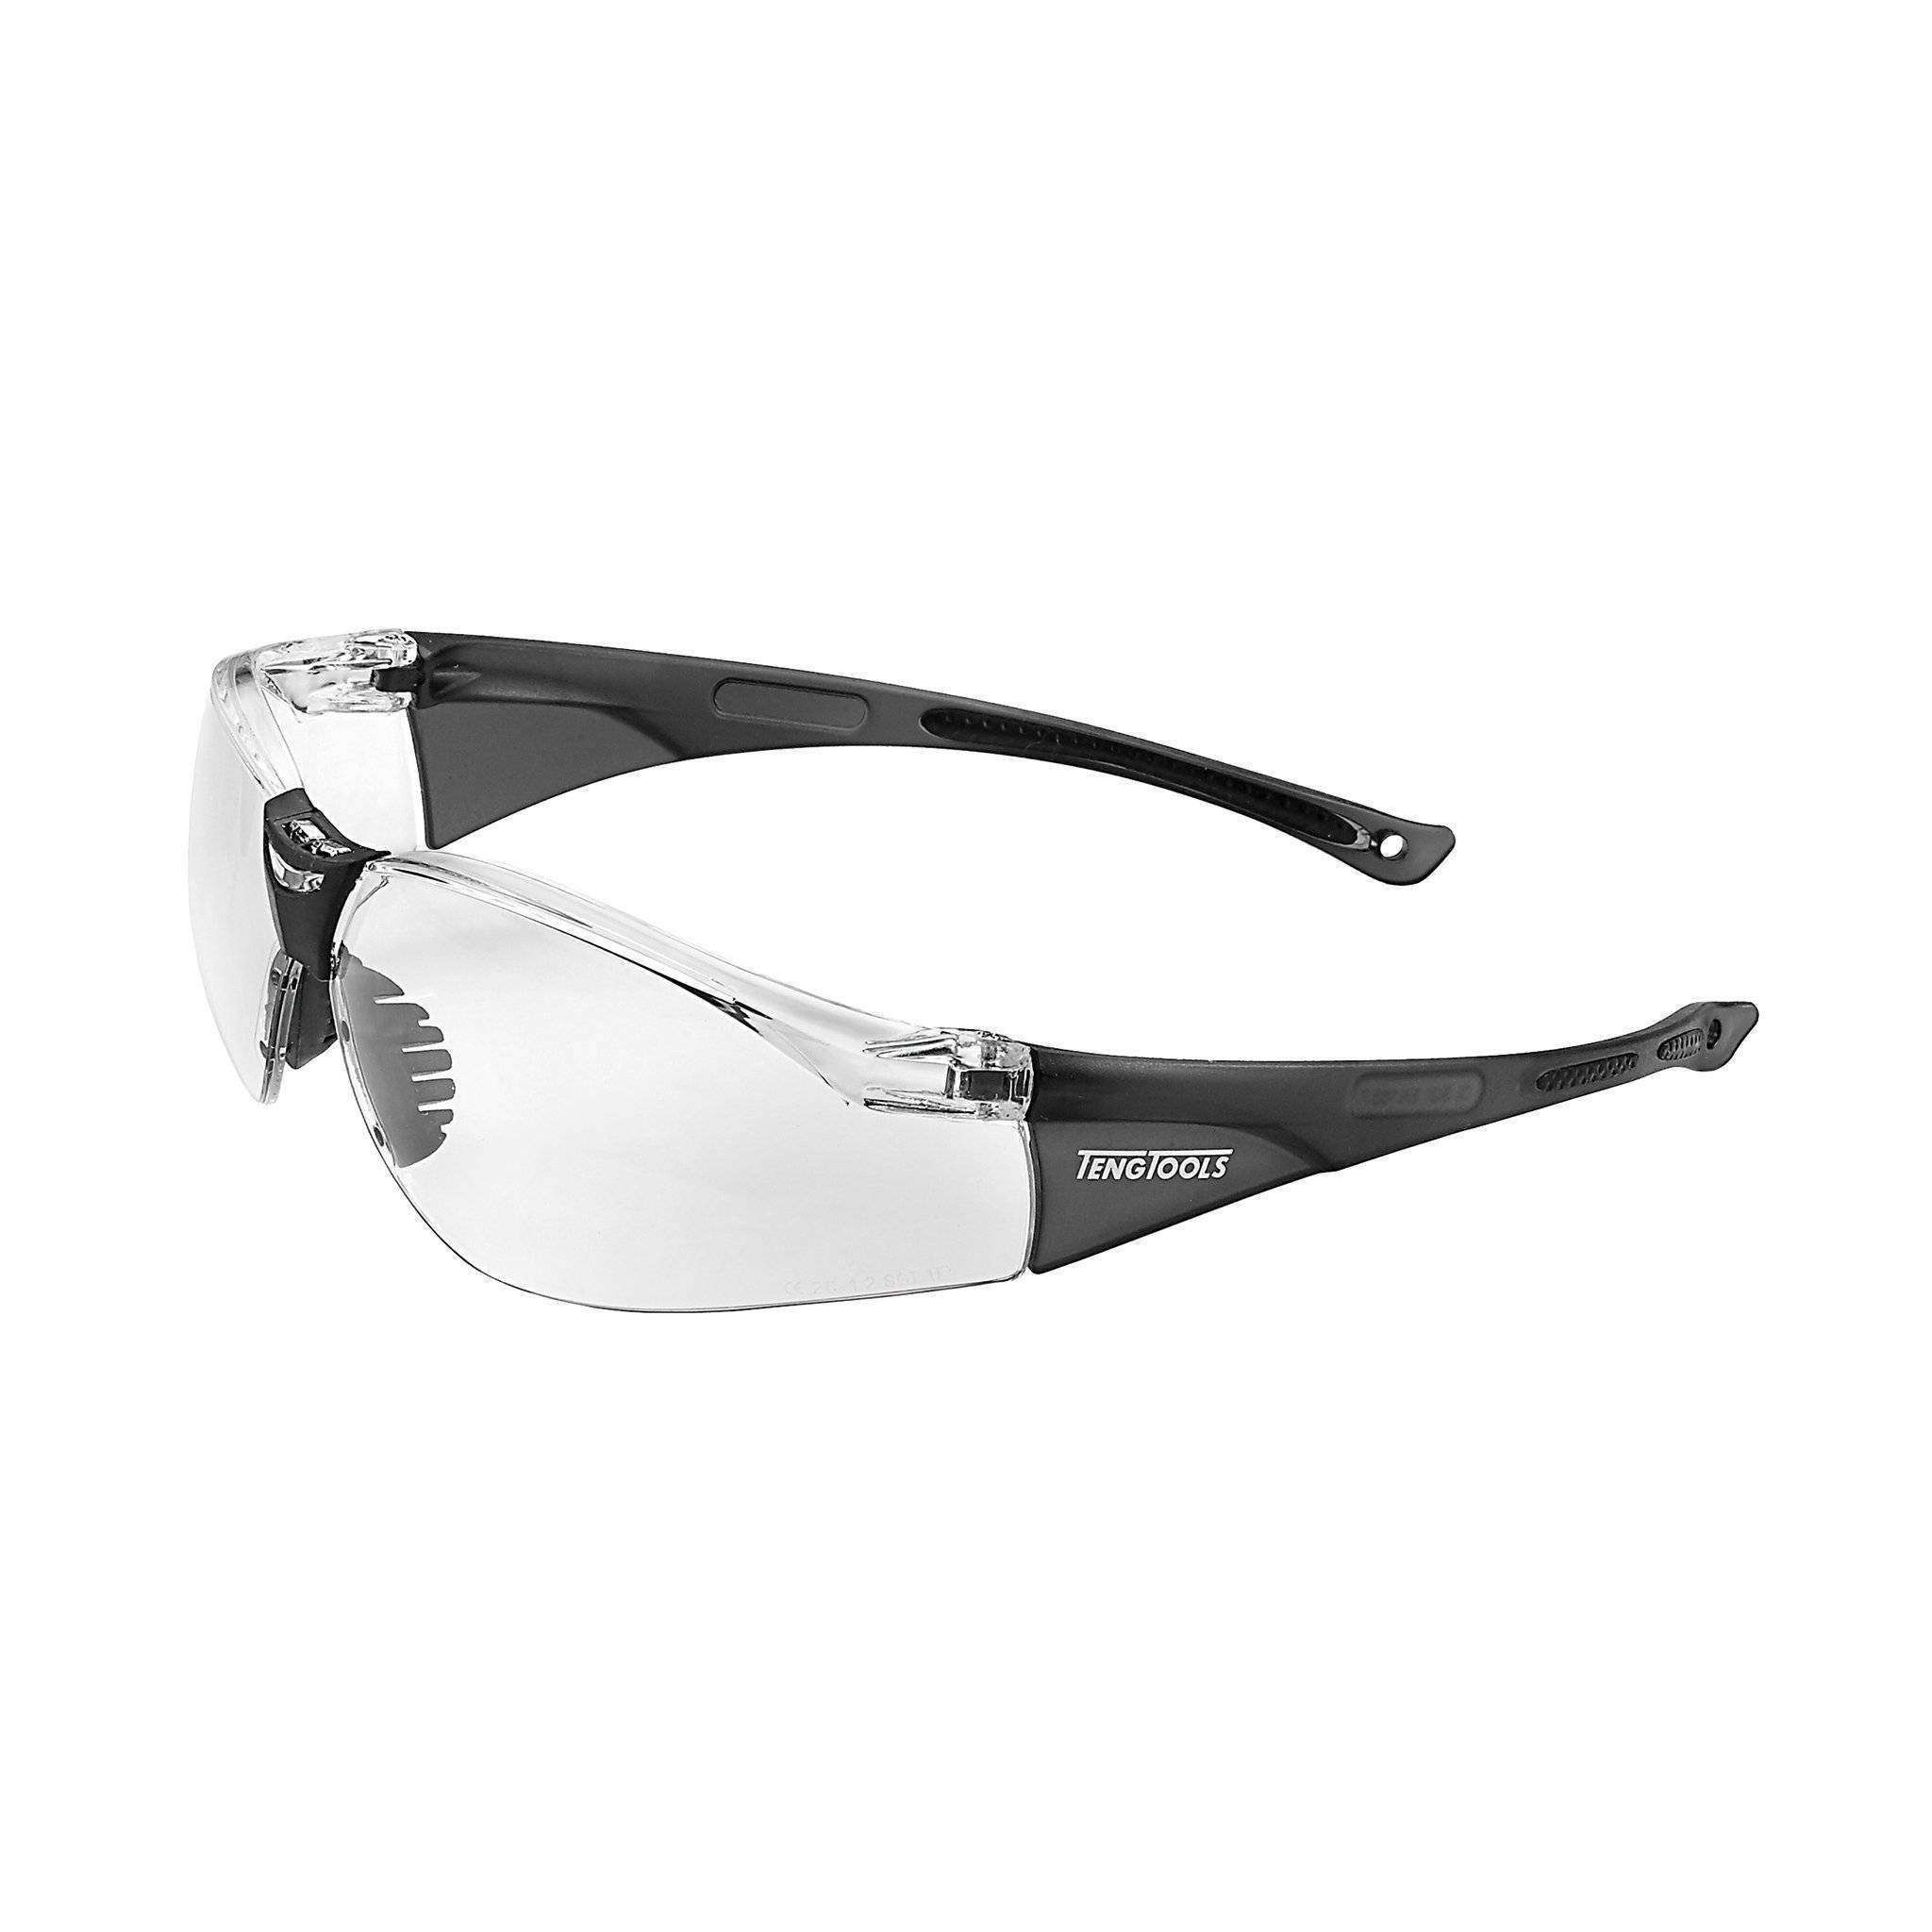 Teng Tools Anti Fog, Scratch Resistant Sports Inspired Safety Glasses With Clear Lenses - SG713